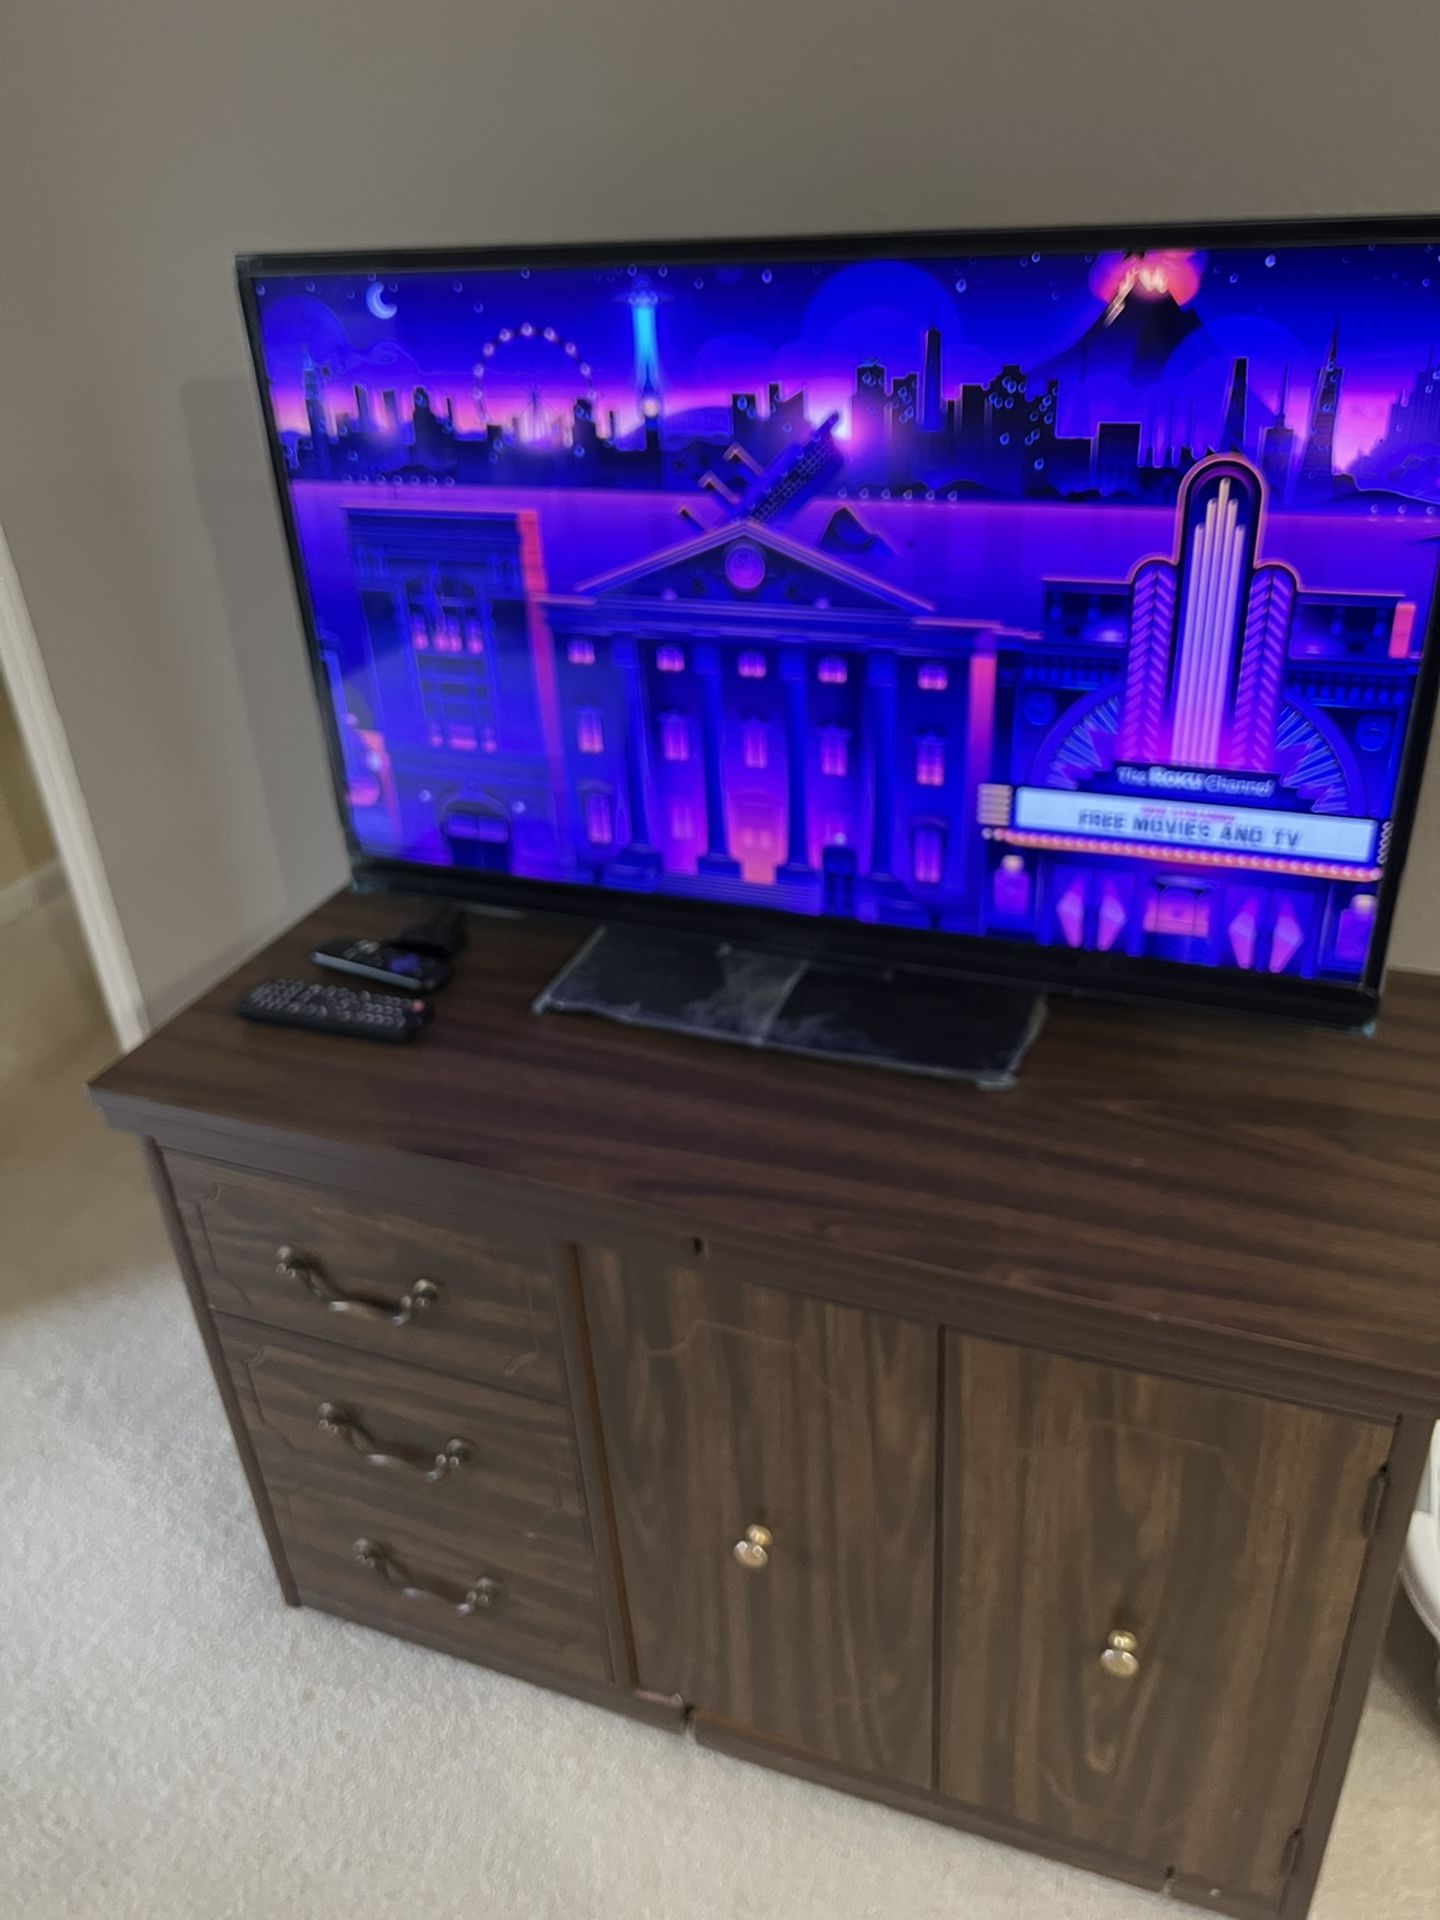 Insignia 39” Full Hd 1080p Tv And The Multipurpose Tv Table Or Office Desk For Sale